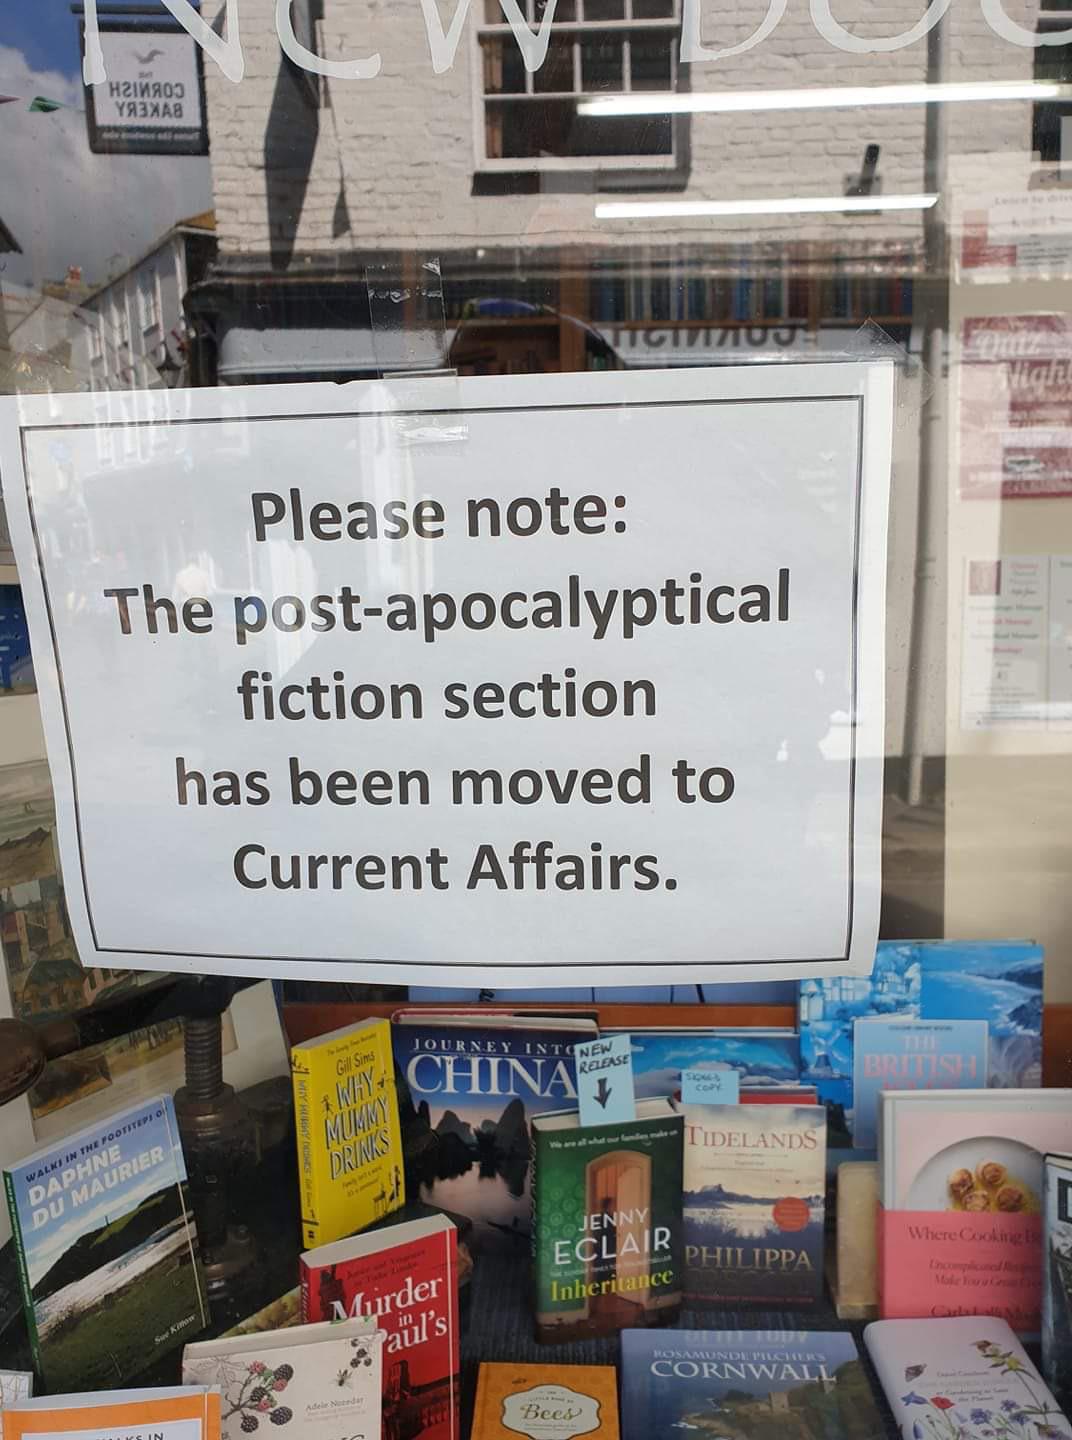 florida international university - 00 Y Please note The postapocalyptical fiction section has been moved to Current Affairs. Journey Int New British China Release Tidelands H Walki In The Footitepi Daphine Du Maurier Where Cooking Jenny Eclair Inheritance